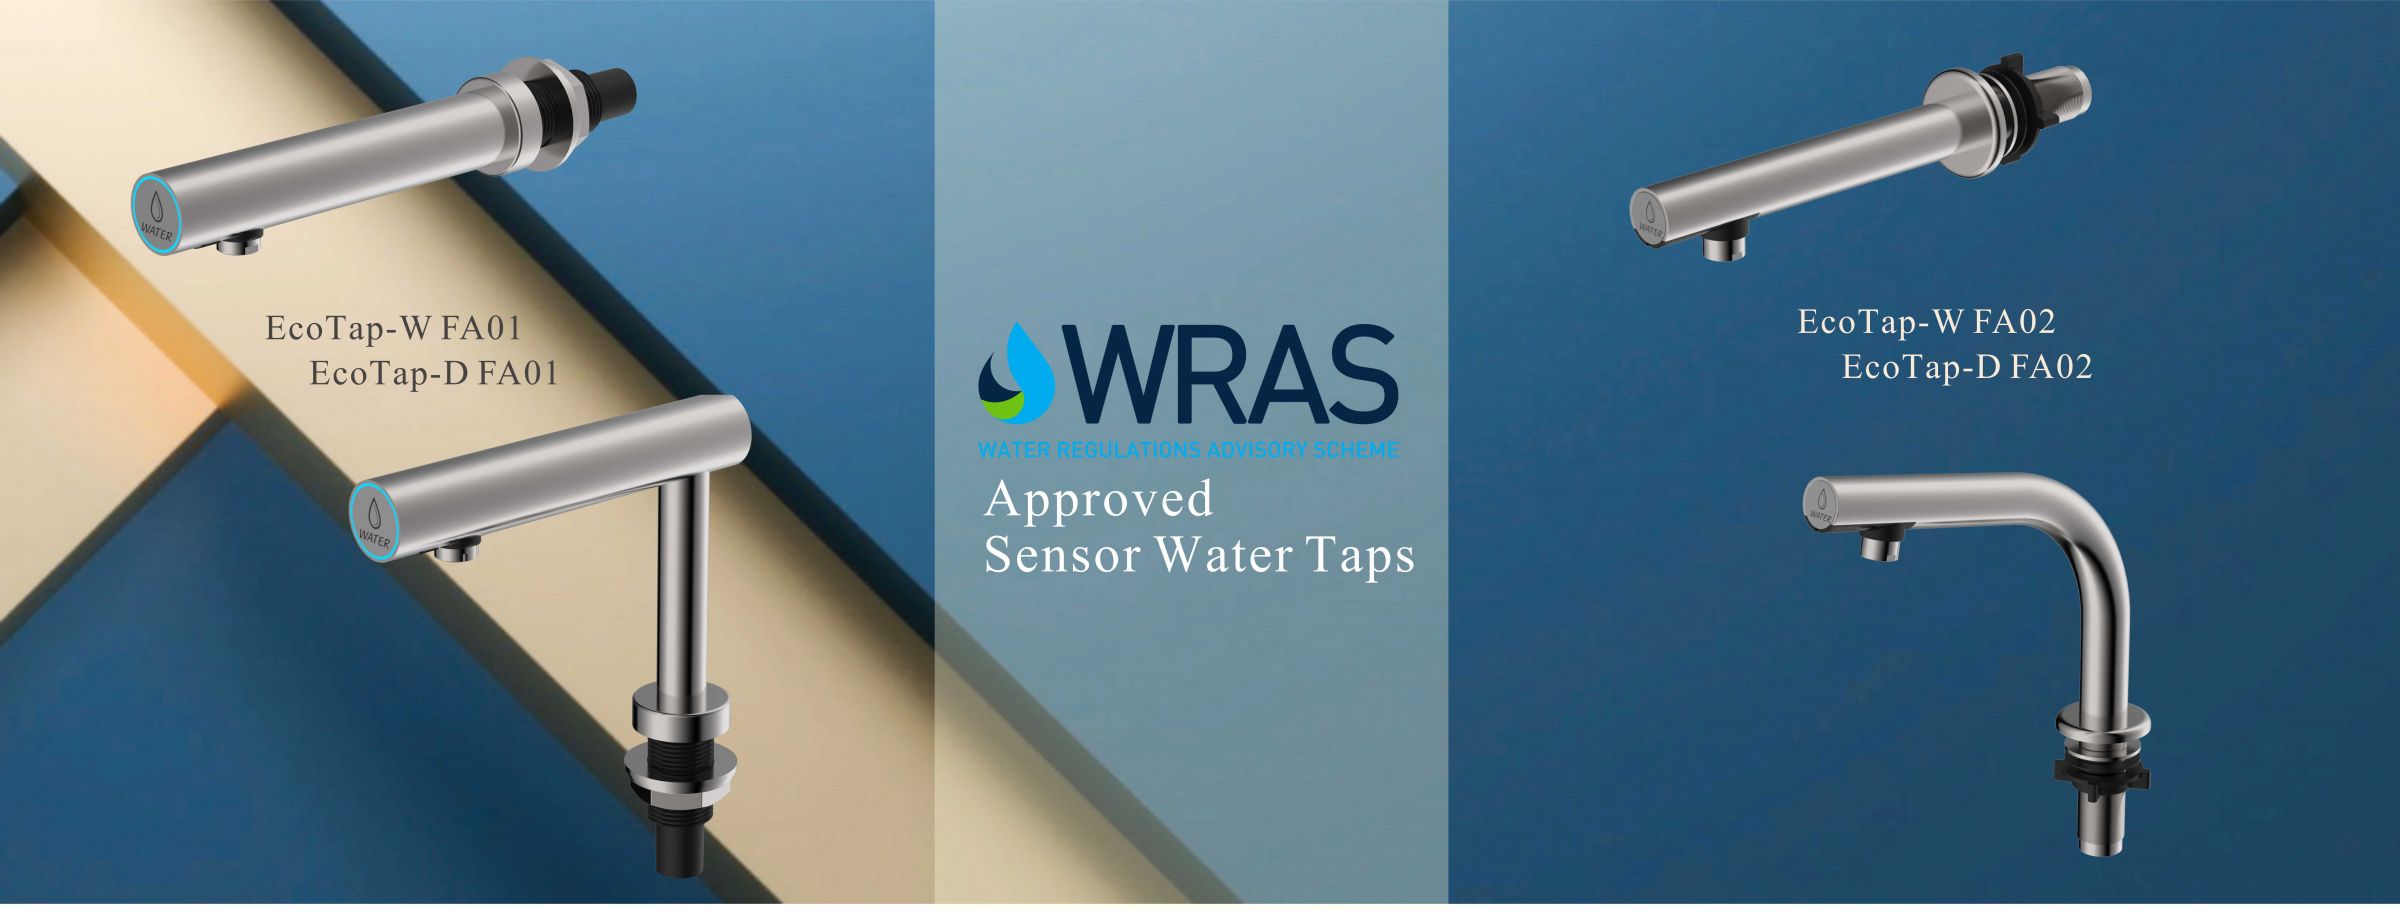 WRAS Approved Auto Faucets